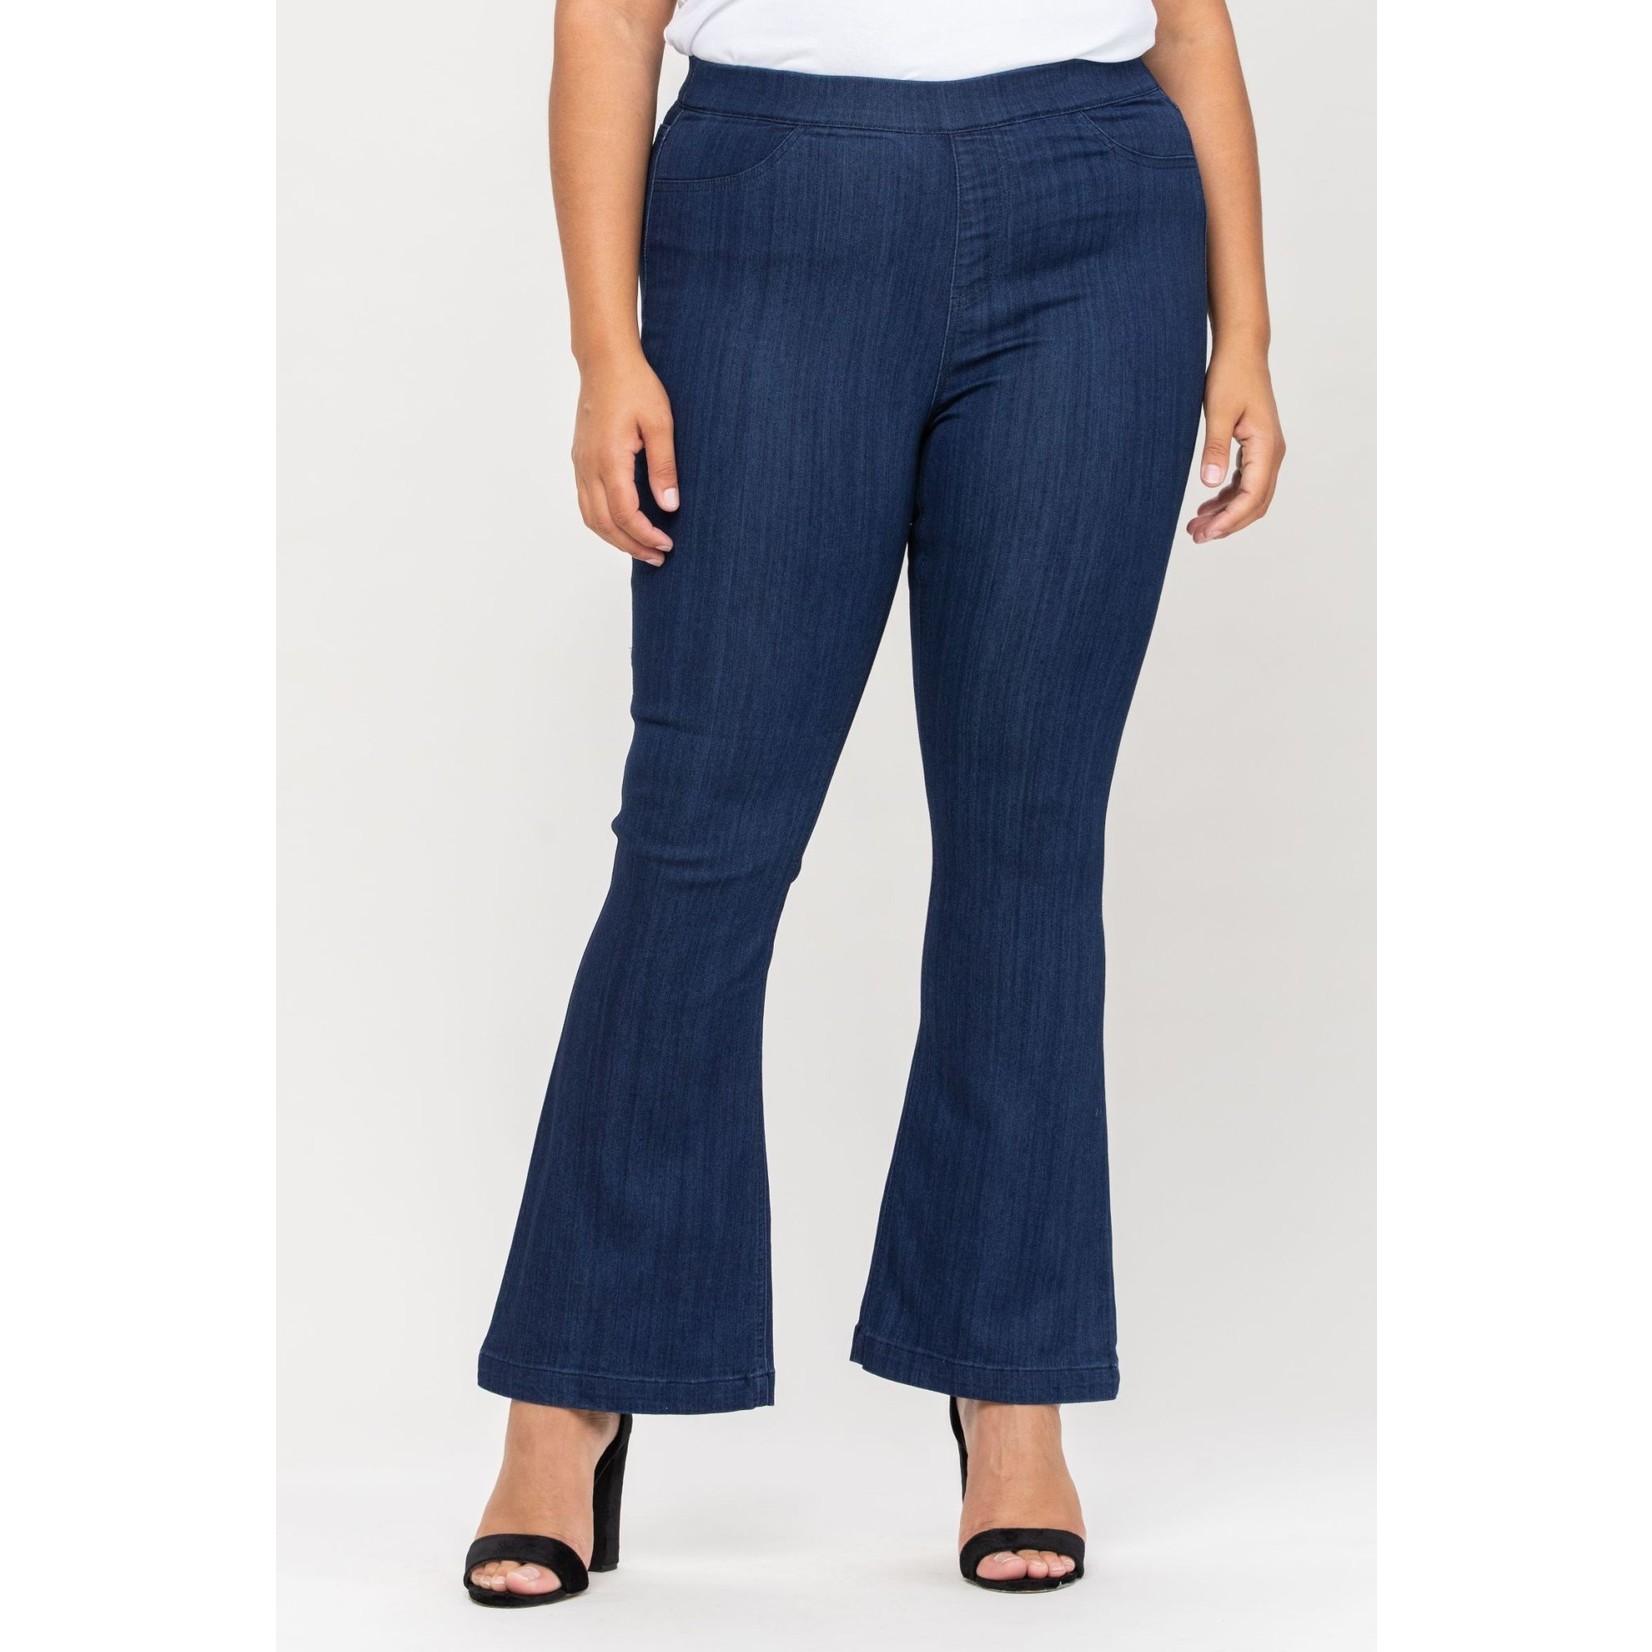 Cello Plus Mid Rise Pull On Flare Jegging